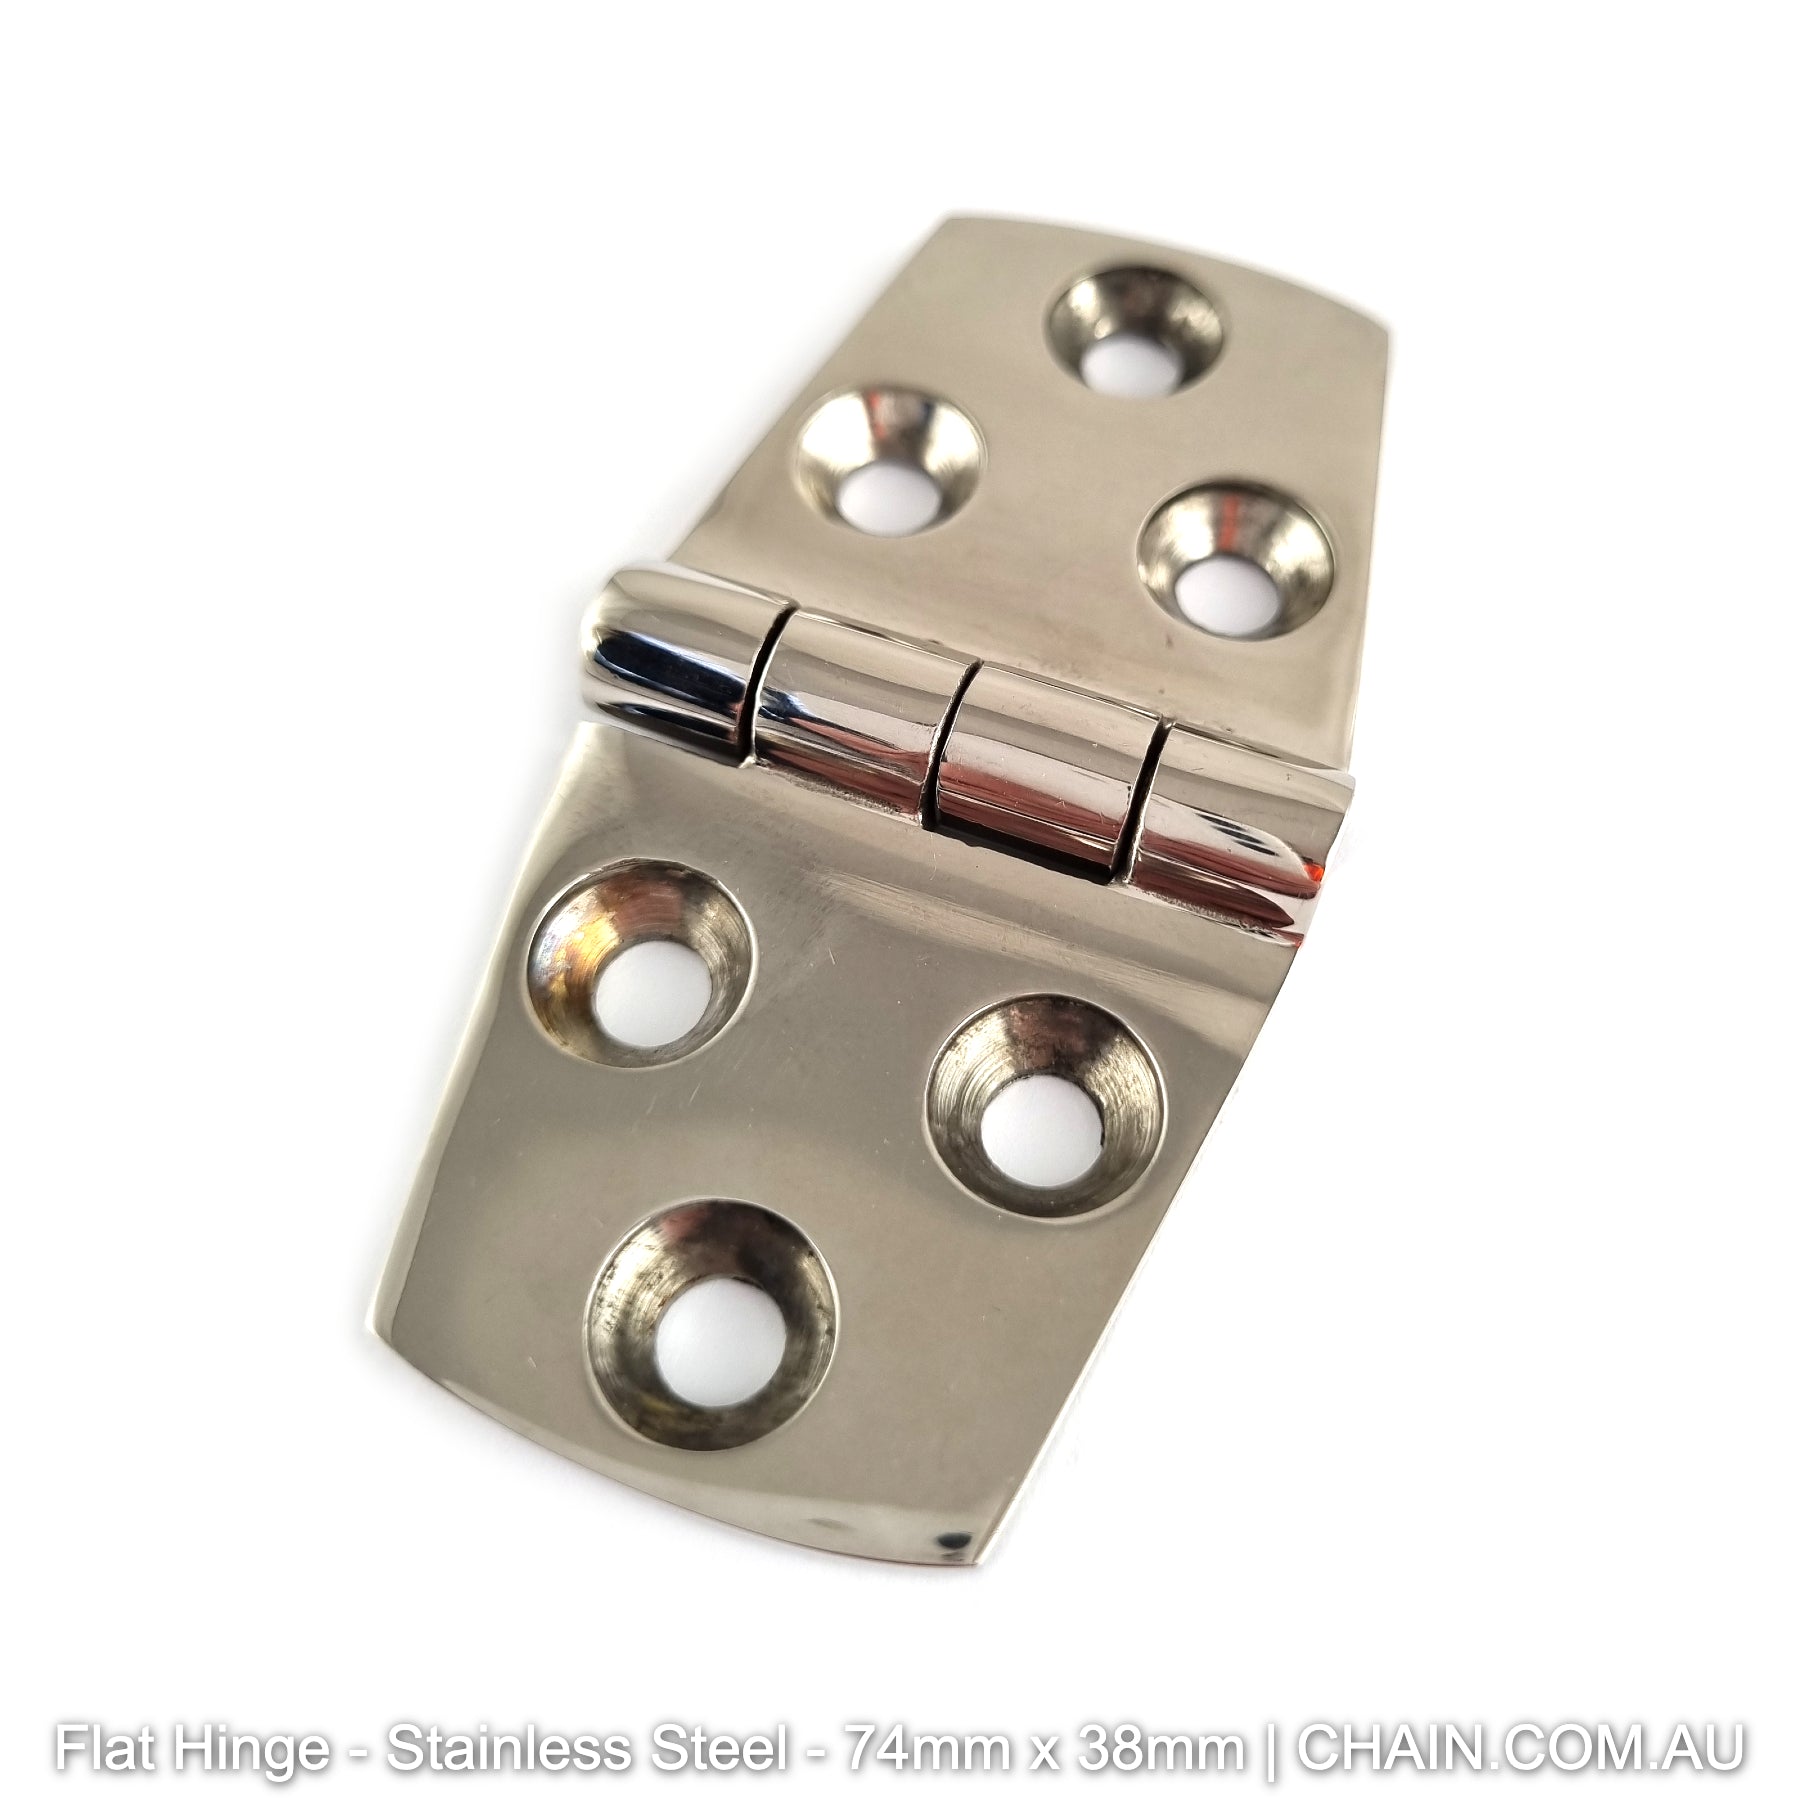 Stainless Steel Flat Hinge. Size: 74mm x 38mm. Shop online chain.com.au. Shipping Australia wide.